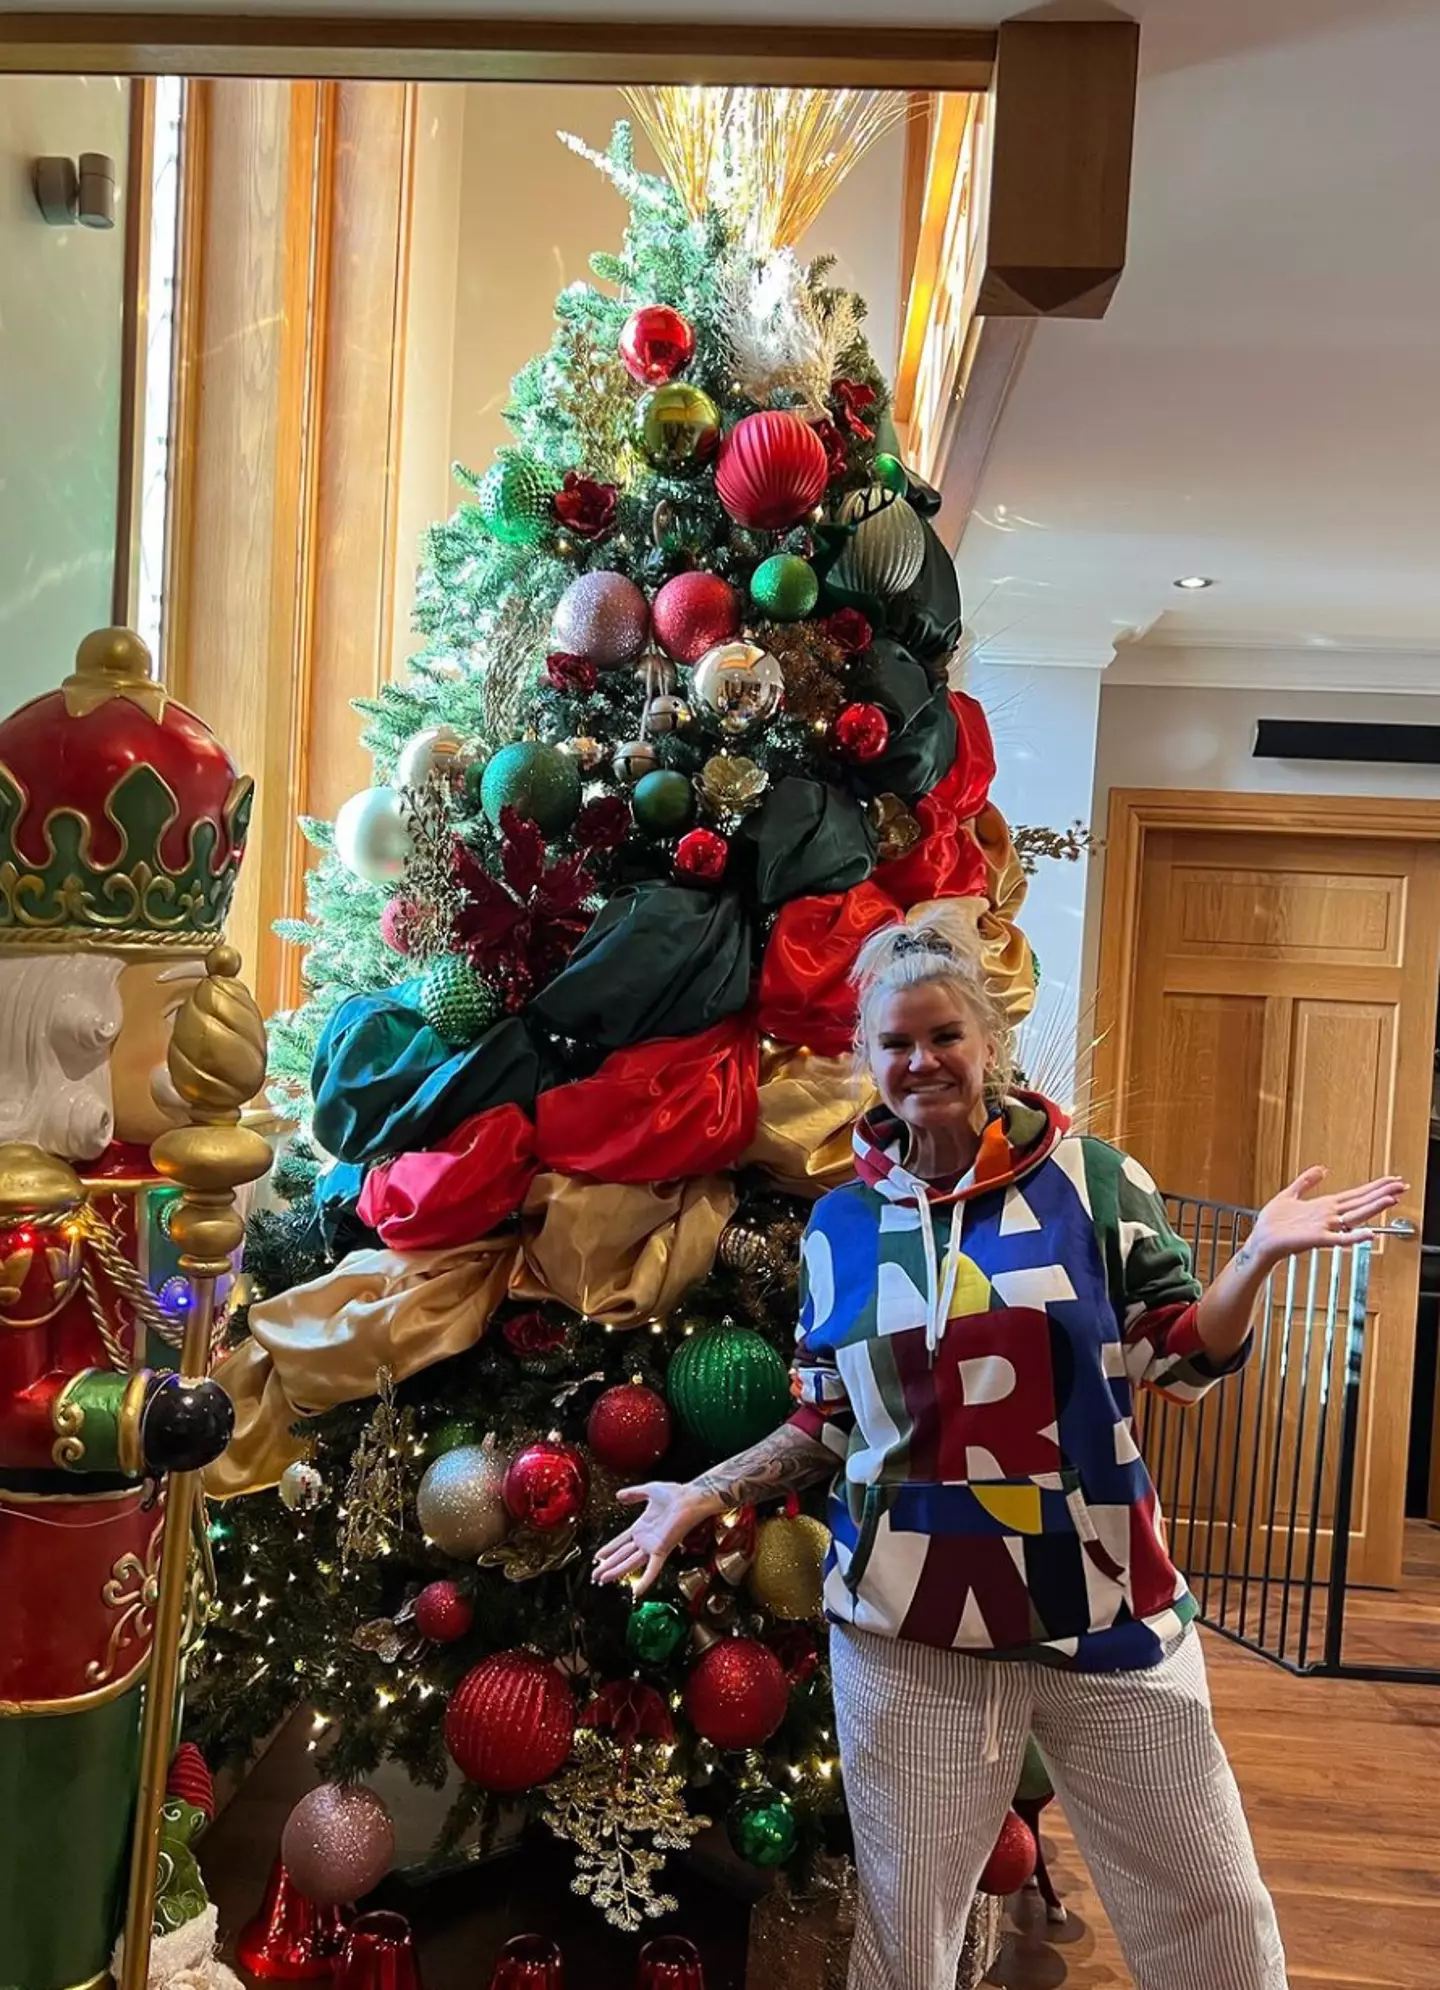 Kerry Katona offered fans a look inside her home.